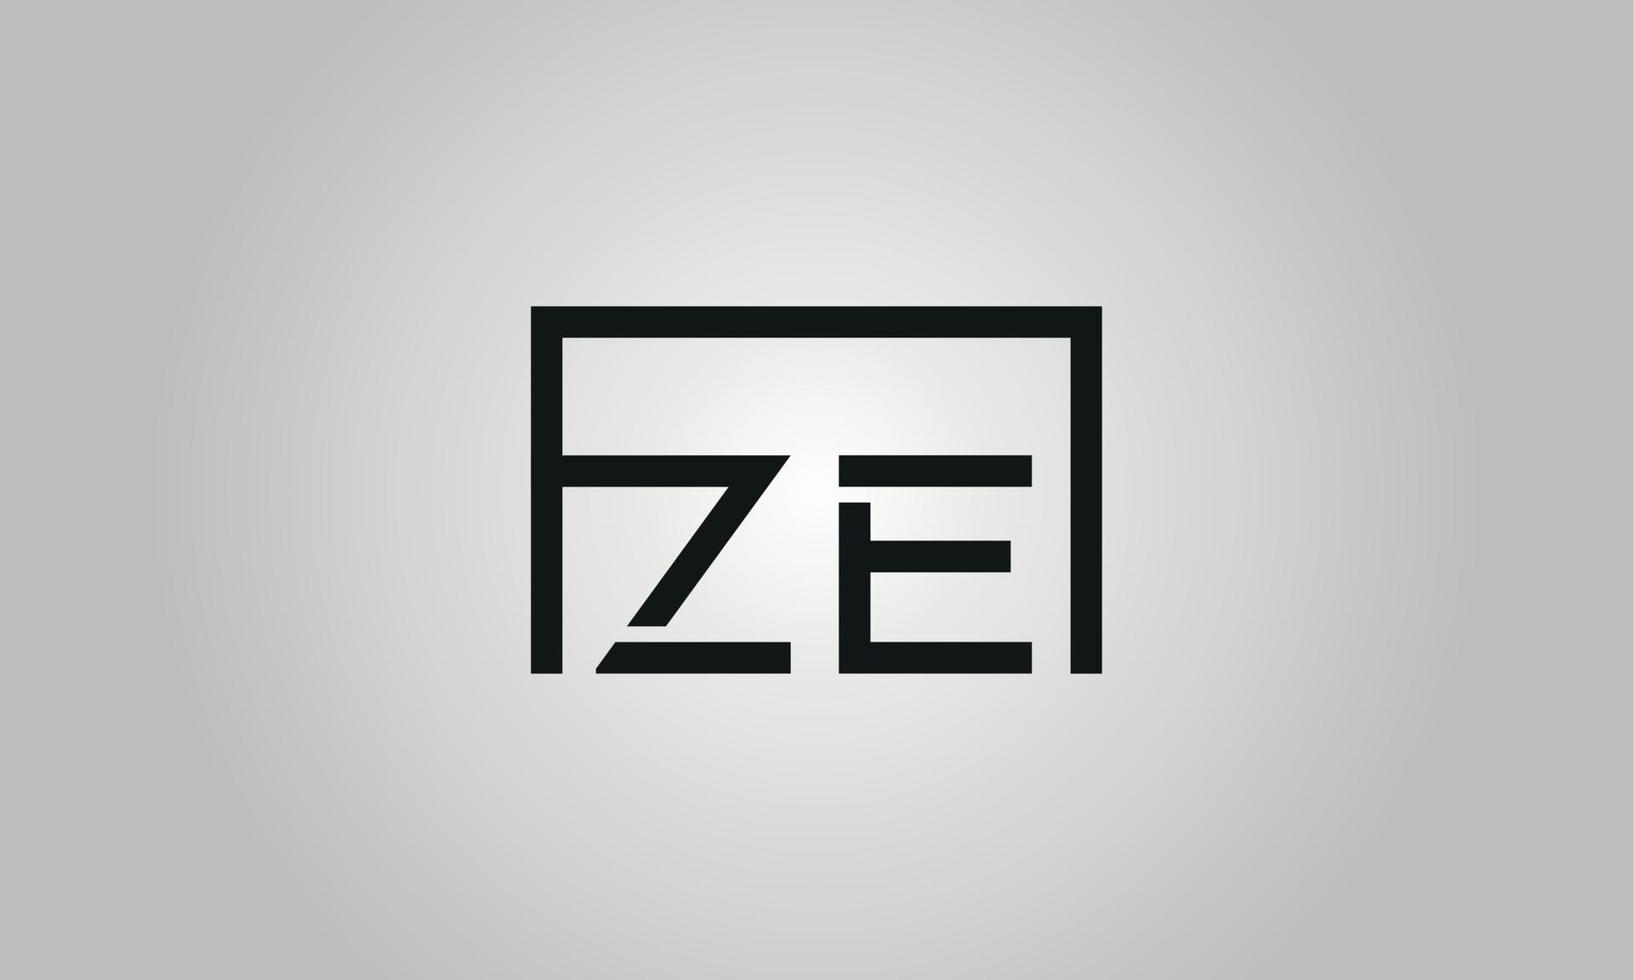 Letter ZE logo design. ZE logo with square shape in black colors vector free vector template.